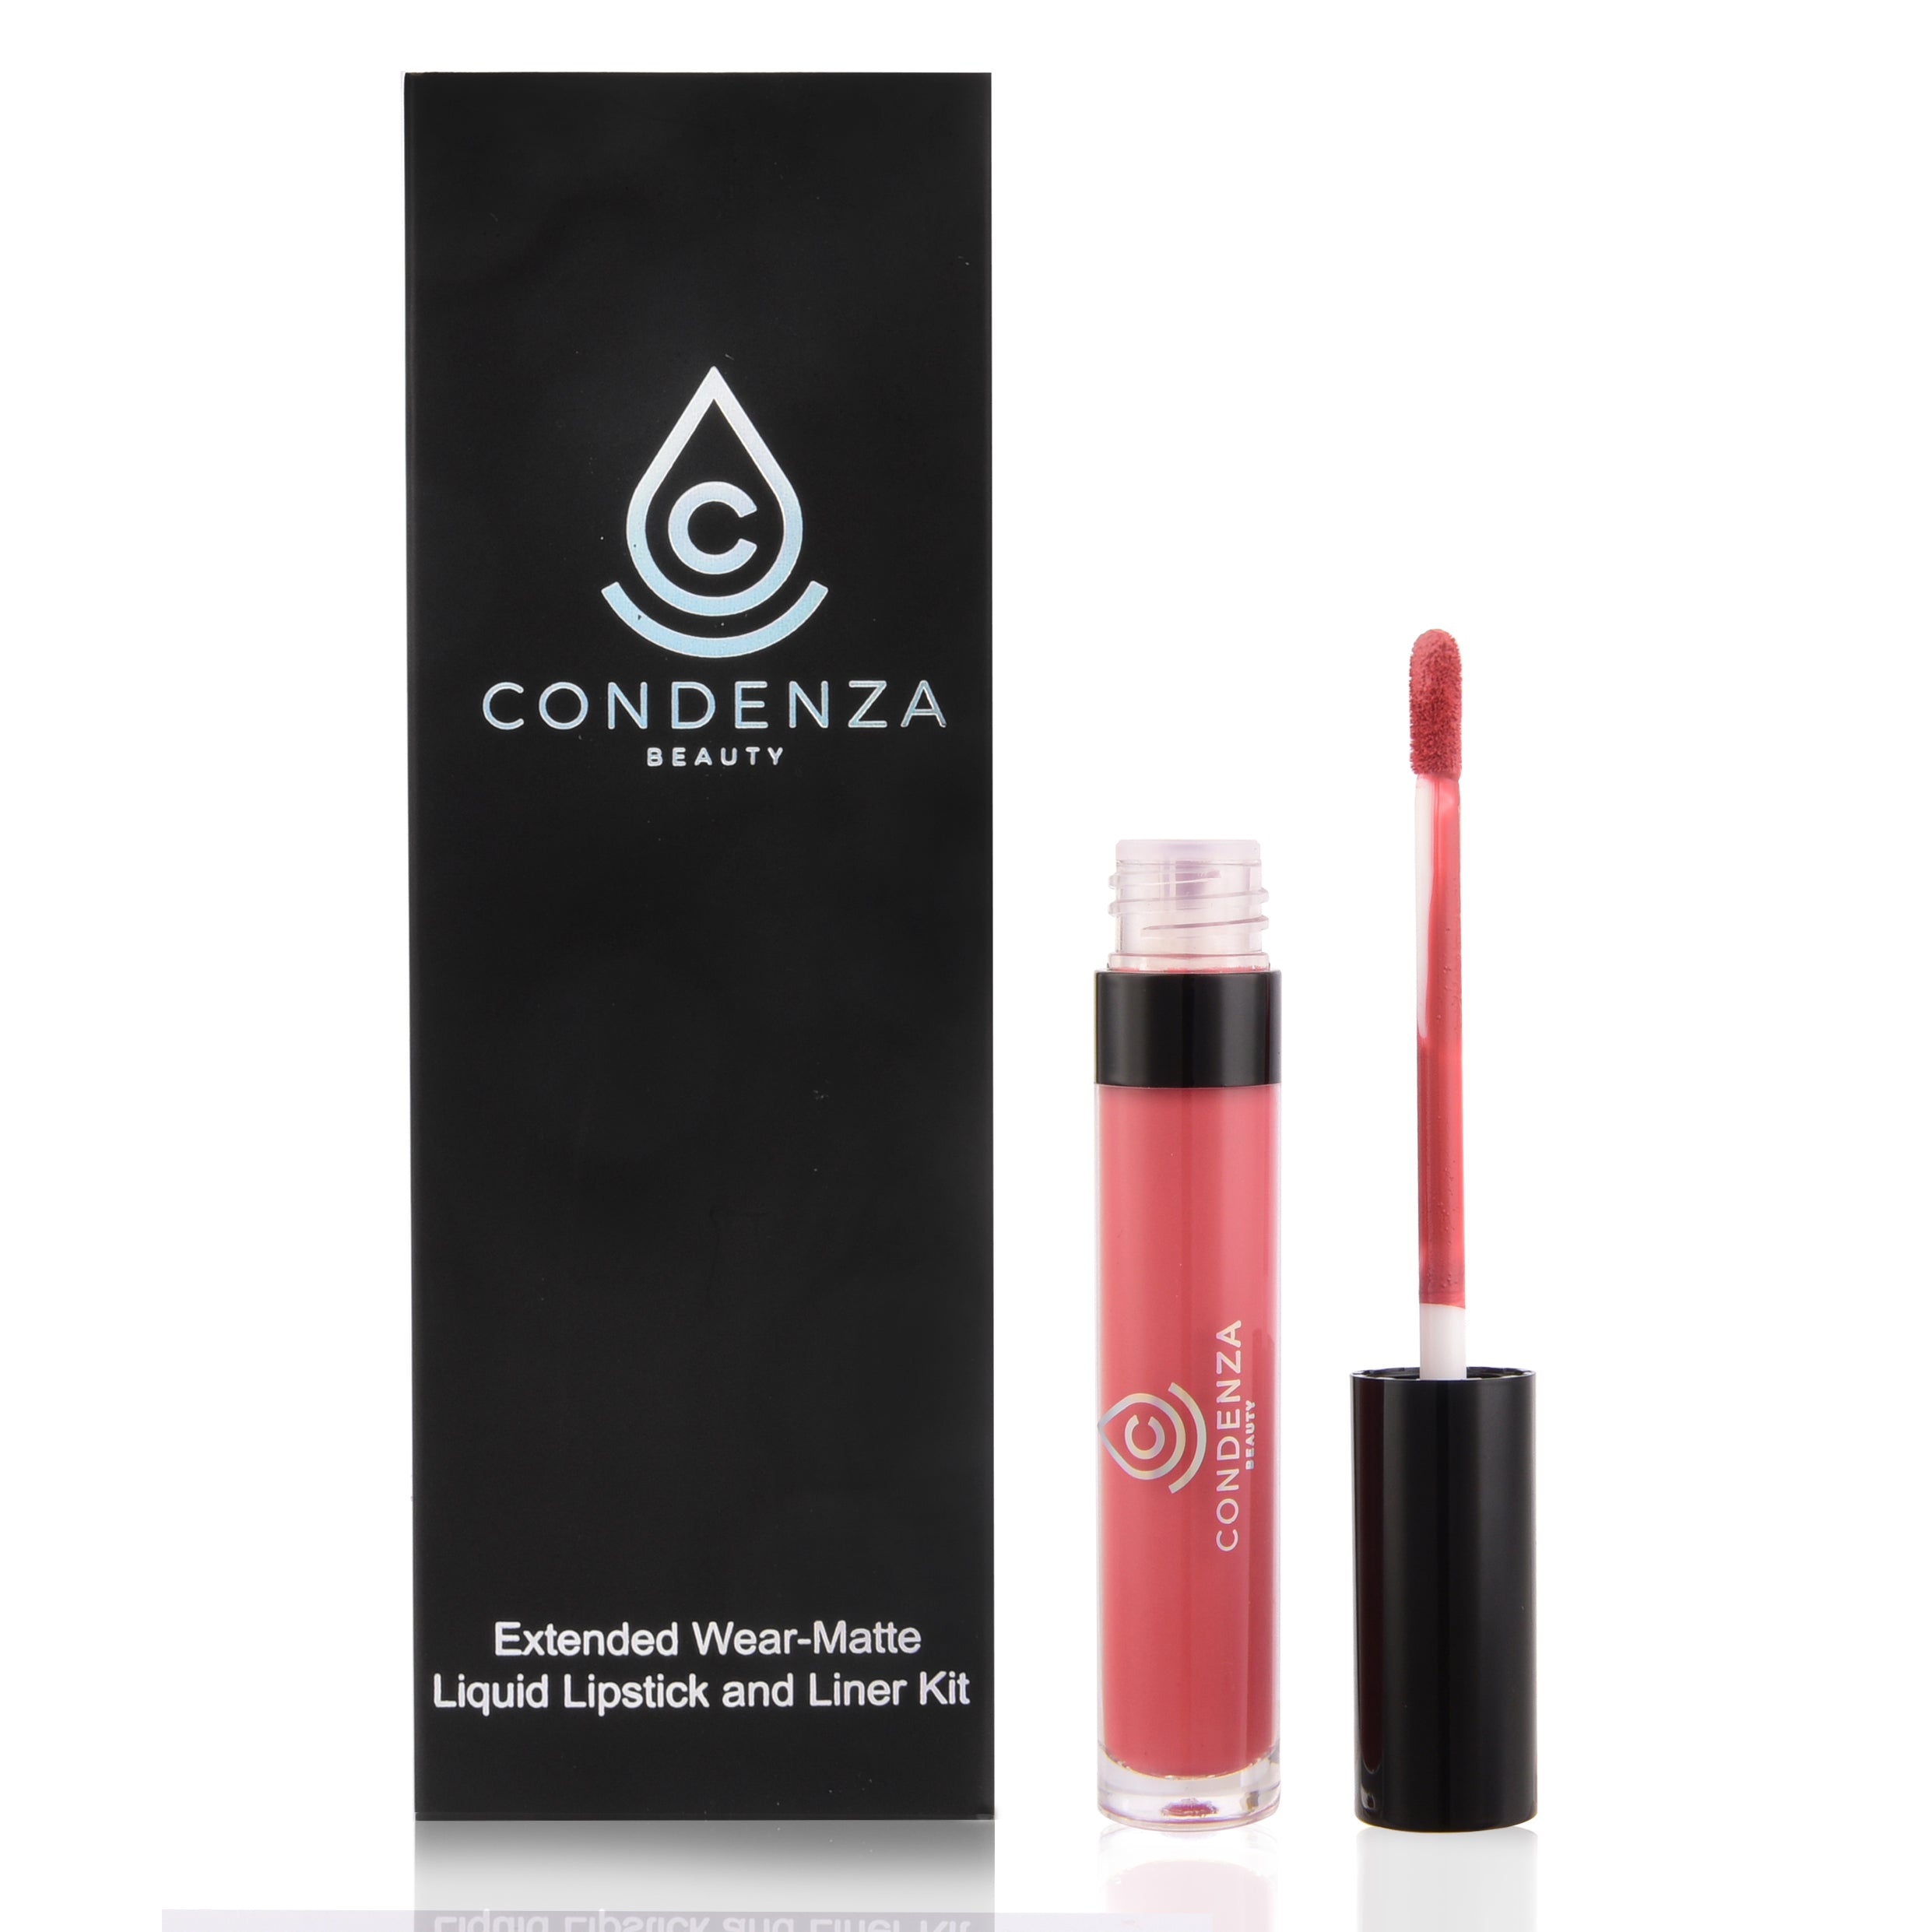 Extended Wear- Mate Liquid Lipstick and Liner Kit - Condenza Beauty